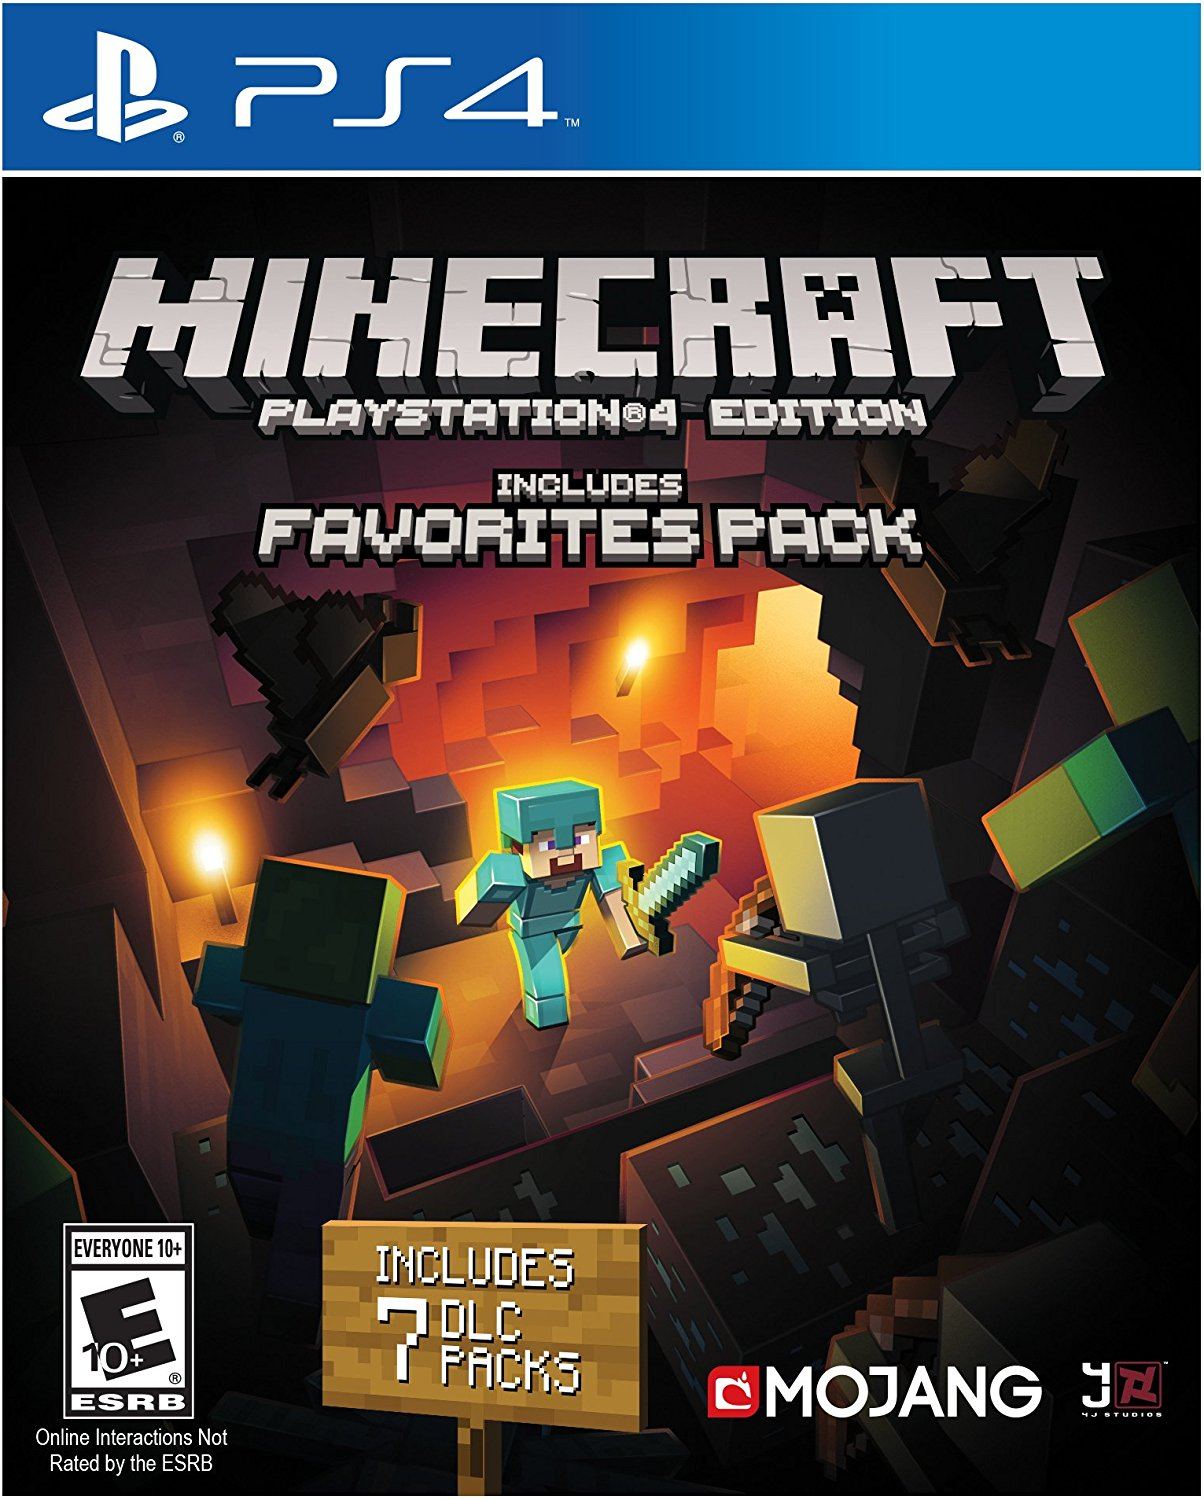 Minecraft: PlayStation 4 Edition [includes Favorites Pack] for PlayStation 4